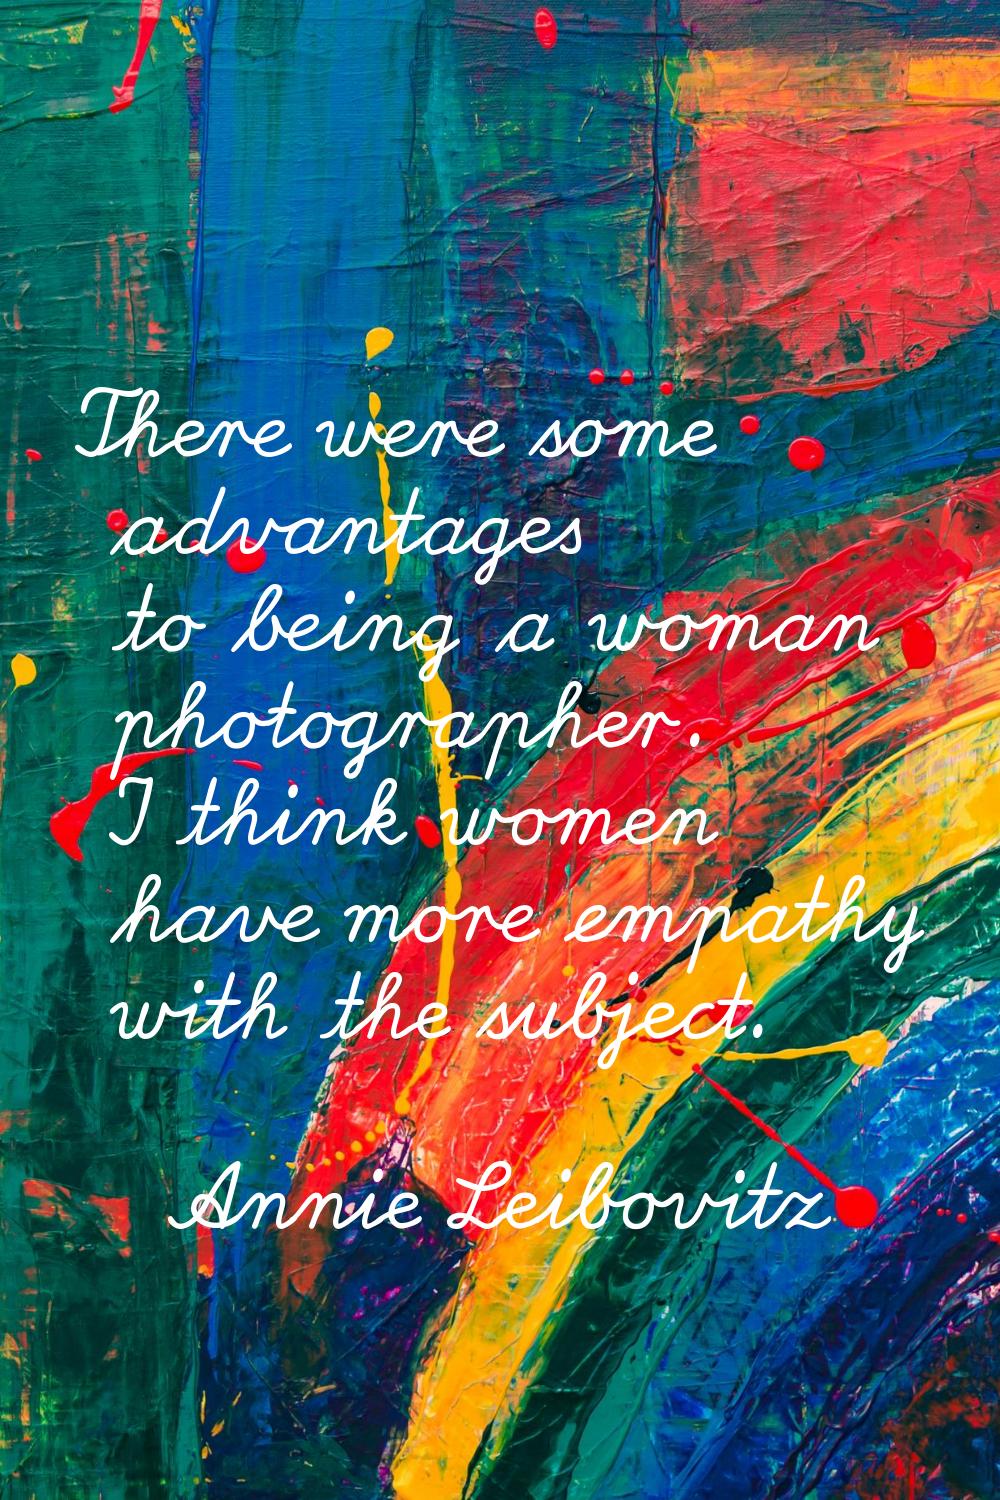 There were some advantages to being a woman photographer. I think women have more empathy with the 